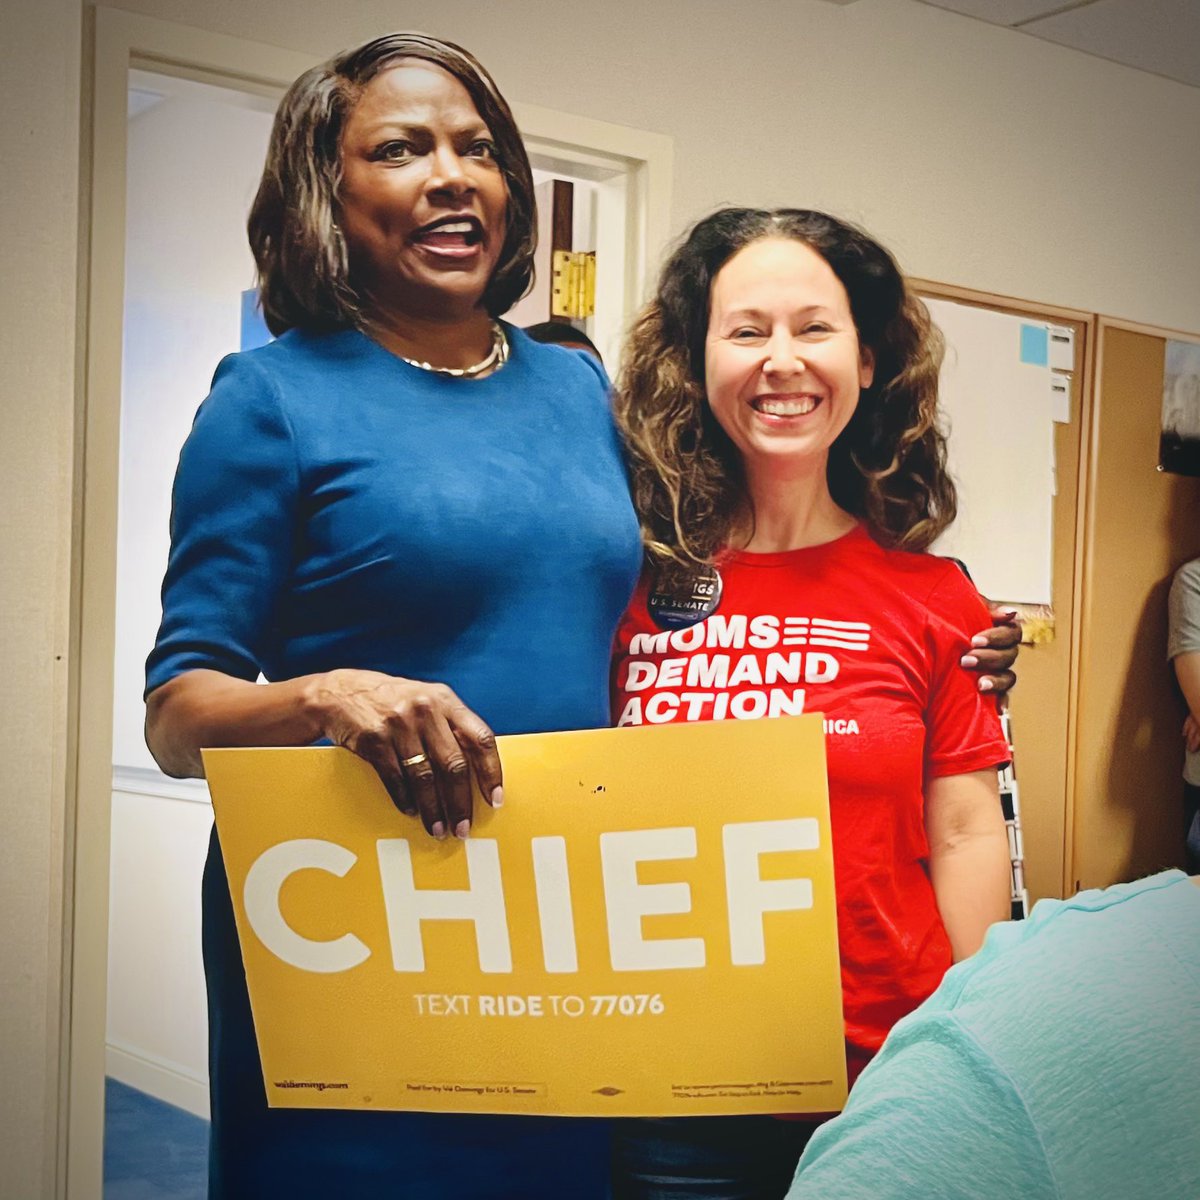 While we making calls and writing postcards at her office in Orlando, @valdemings came to thank her volunteers. It’s been an honor to volunteer for #TheChief. She shows up and she’s going to fight to #EndGunViolence in Florida. @MomsDemand #NeverTire #MomsAreEverywhere #FlaPol